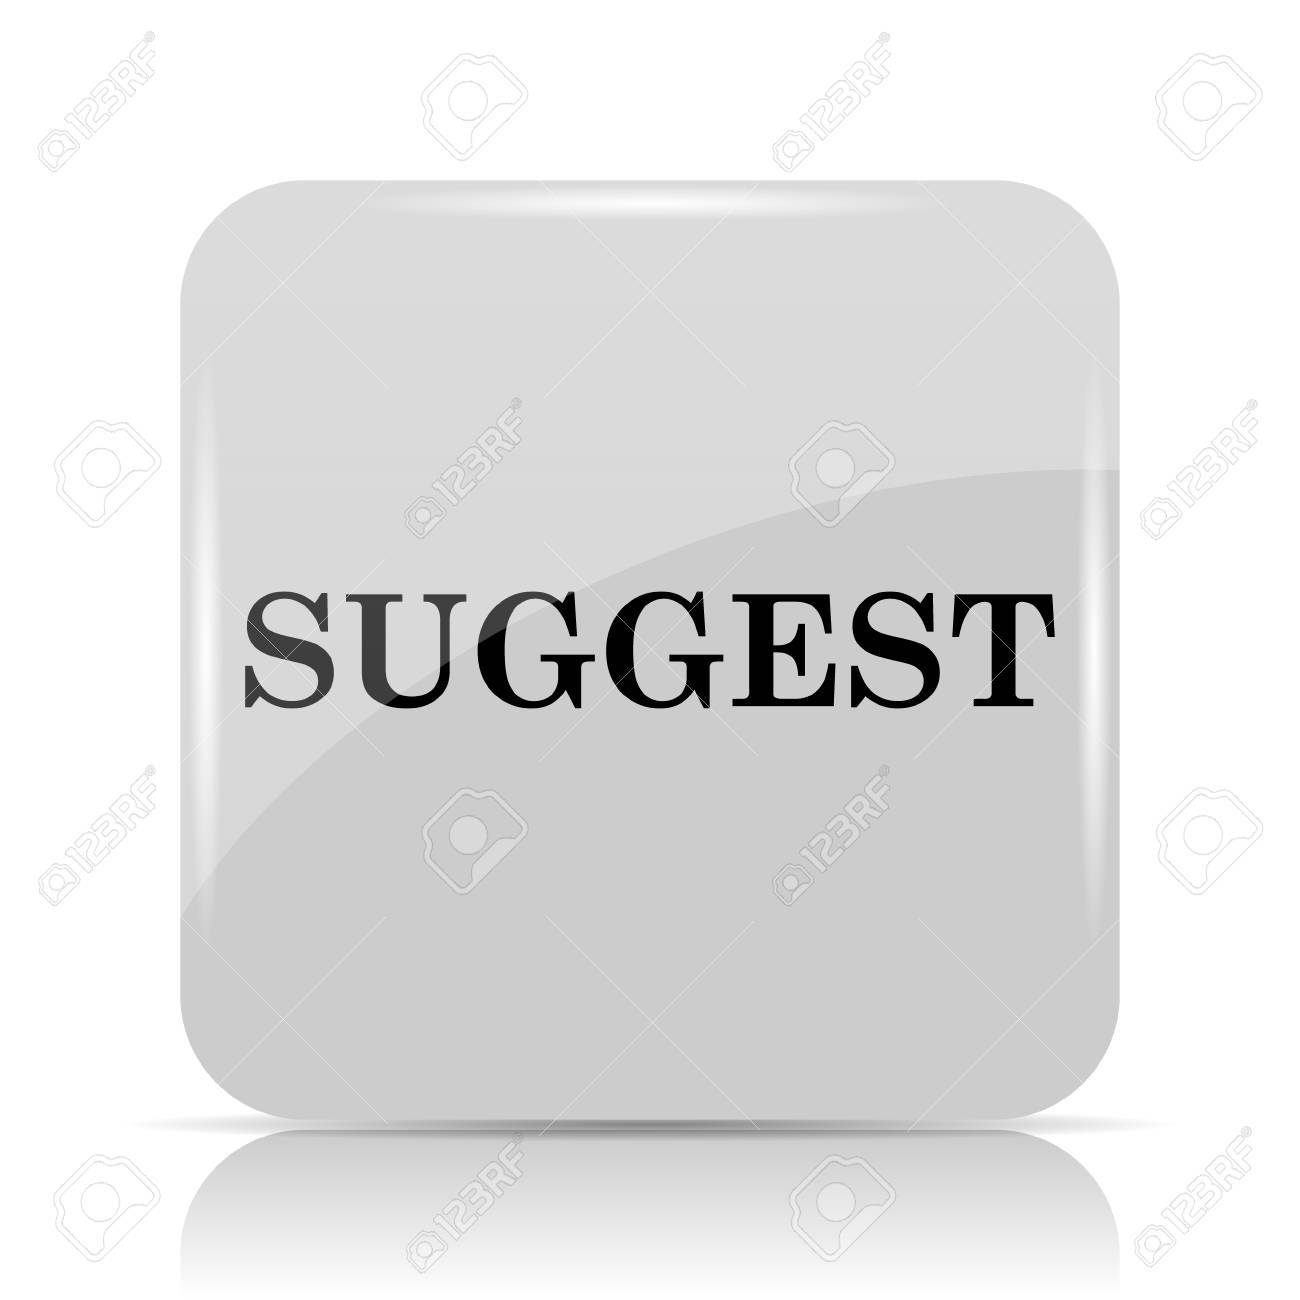 Suggest icon. Internet button on white background Stock Photo 